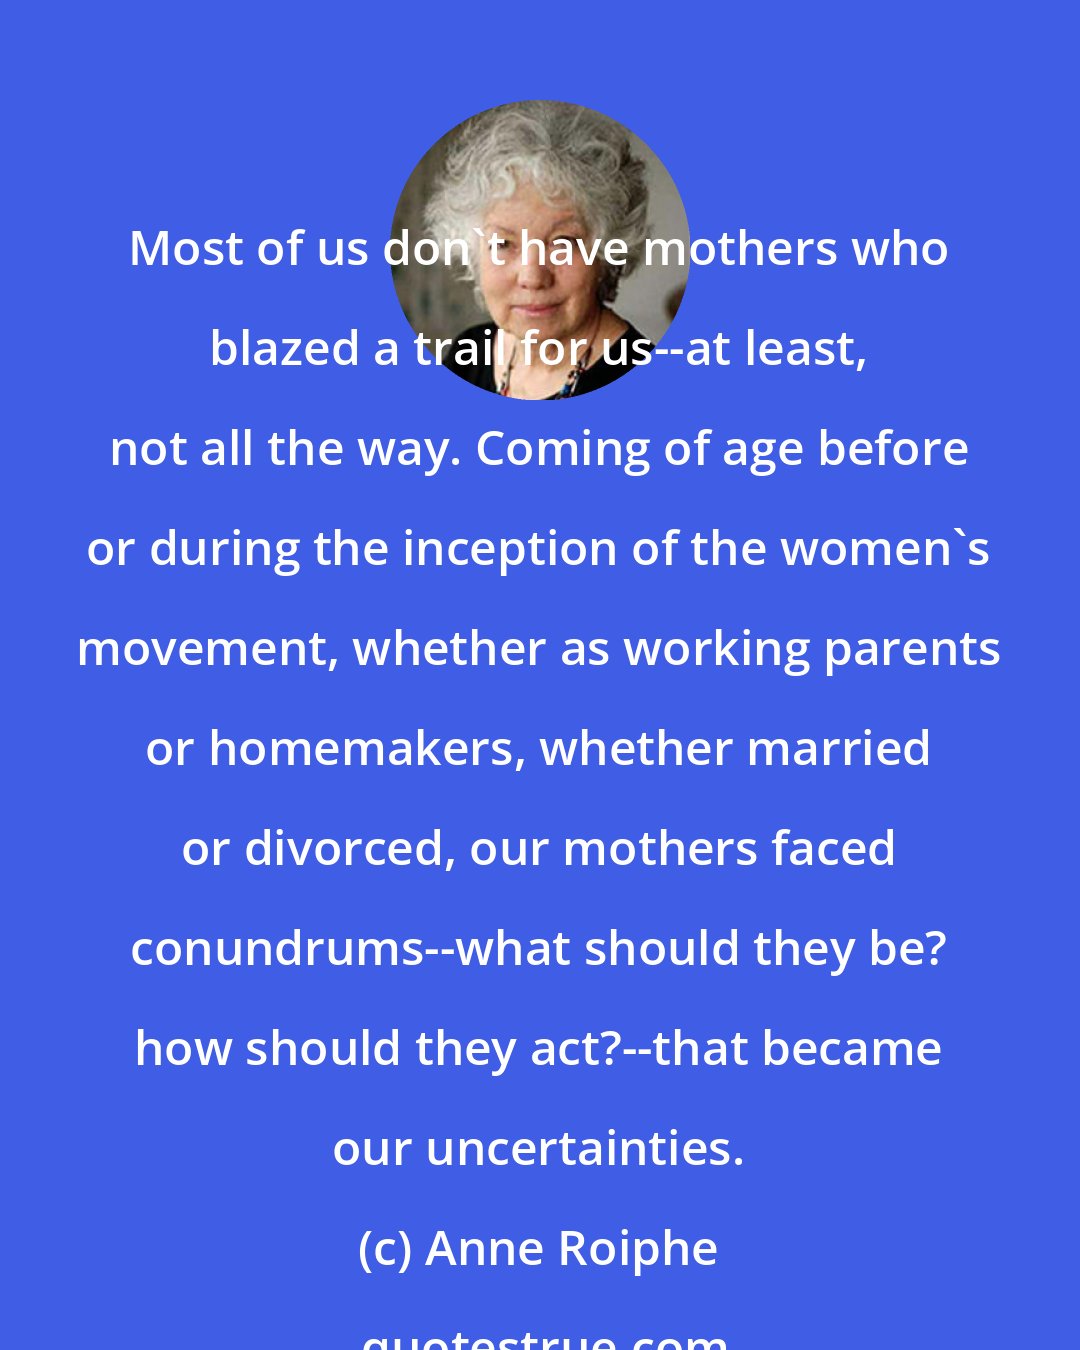 Anne Roiphe: Most of us don't have mothers who blazed a trail for us--at least, not all the way. Coming of age before or during the inception of the women's movement, whether as working parents or homemakers, whether married or divorced, our mothers faced conundrums--what should they be? how should they act?--that became our uncertainties.